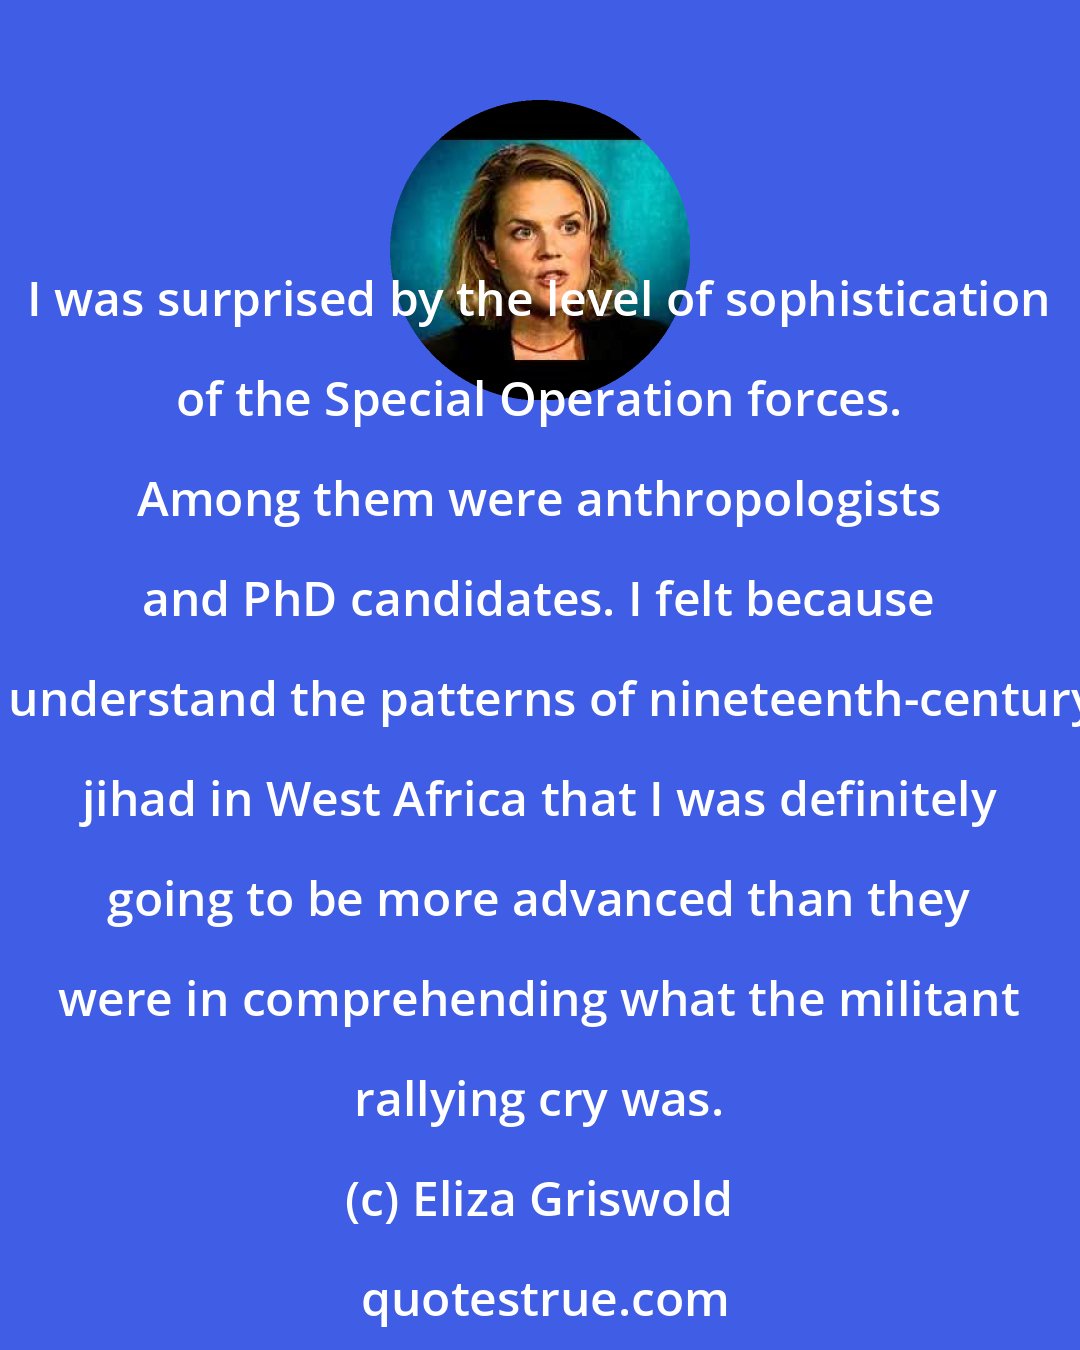 Eliza Griswold: I was surprised by the level of sophistication of the Special Operation forces. Among them were anthropologists and PhD candidates. I felt because I understand the patterns of nineteenth-century jihad in West Africa that I was definitely going to be more advanced than they were in comprehending what the militant rallying cry was.